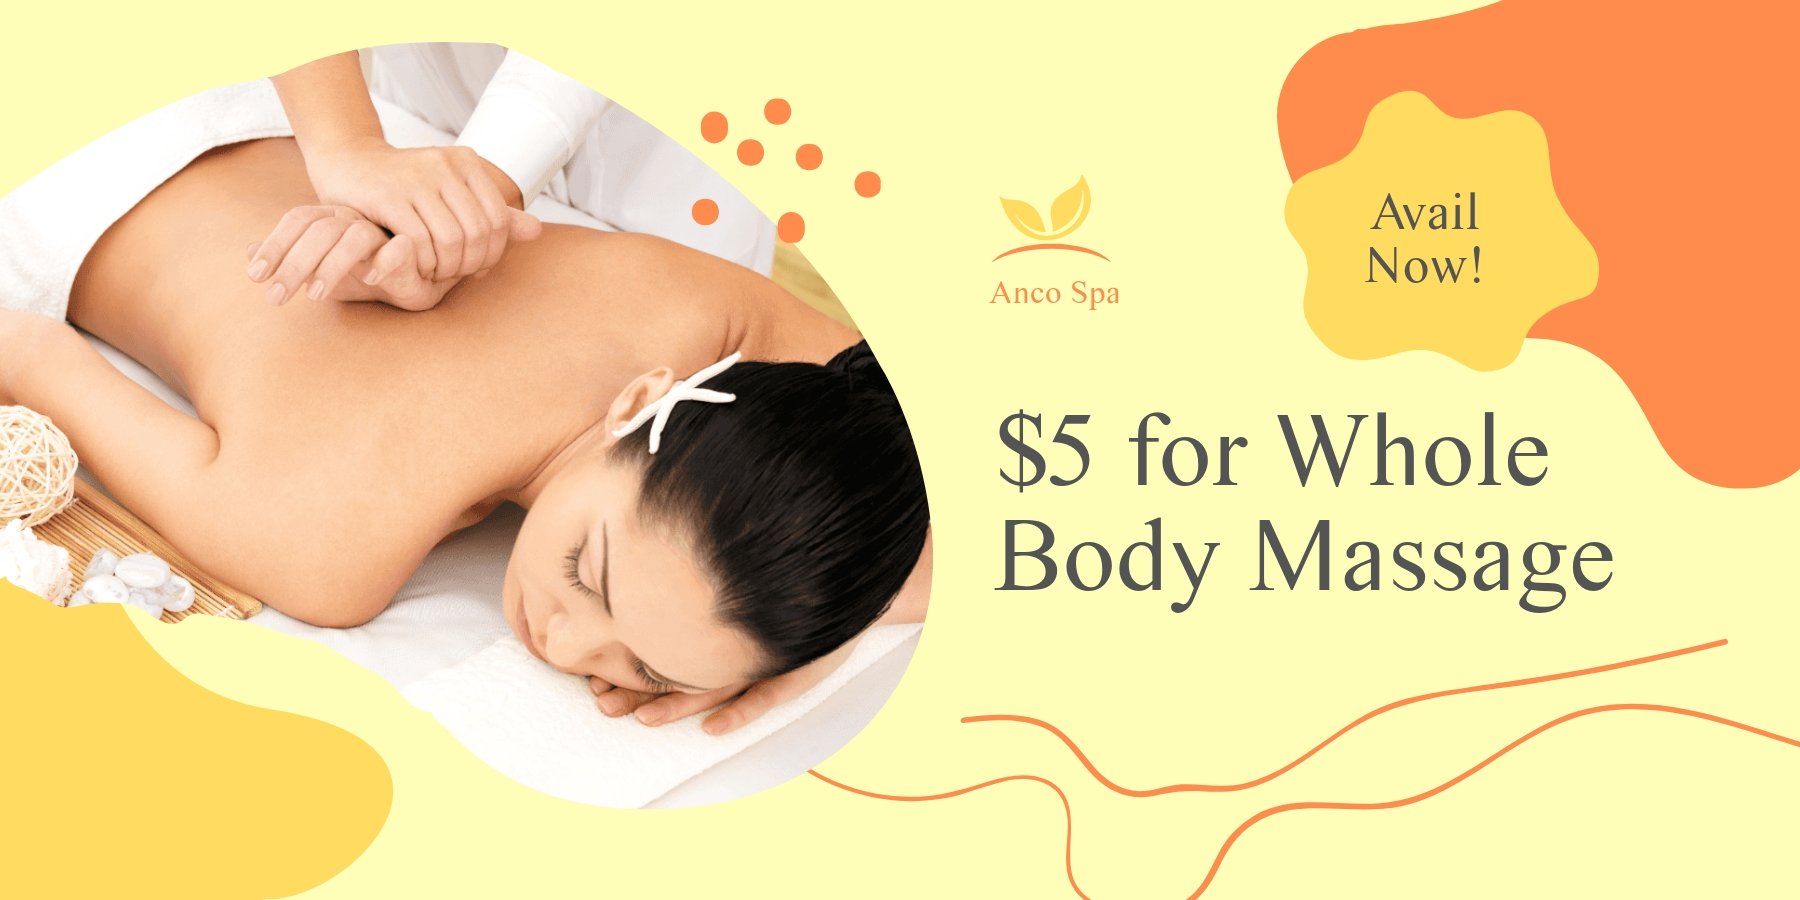 Body Massage Promotion Banner Template